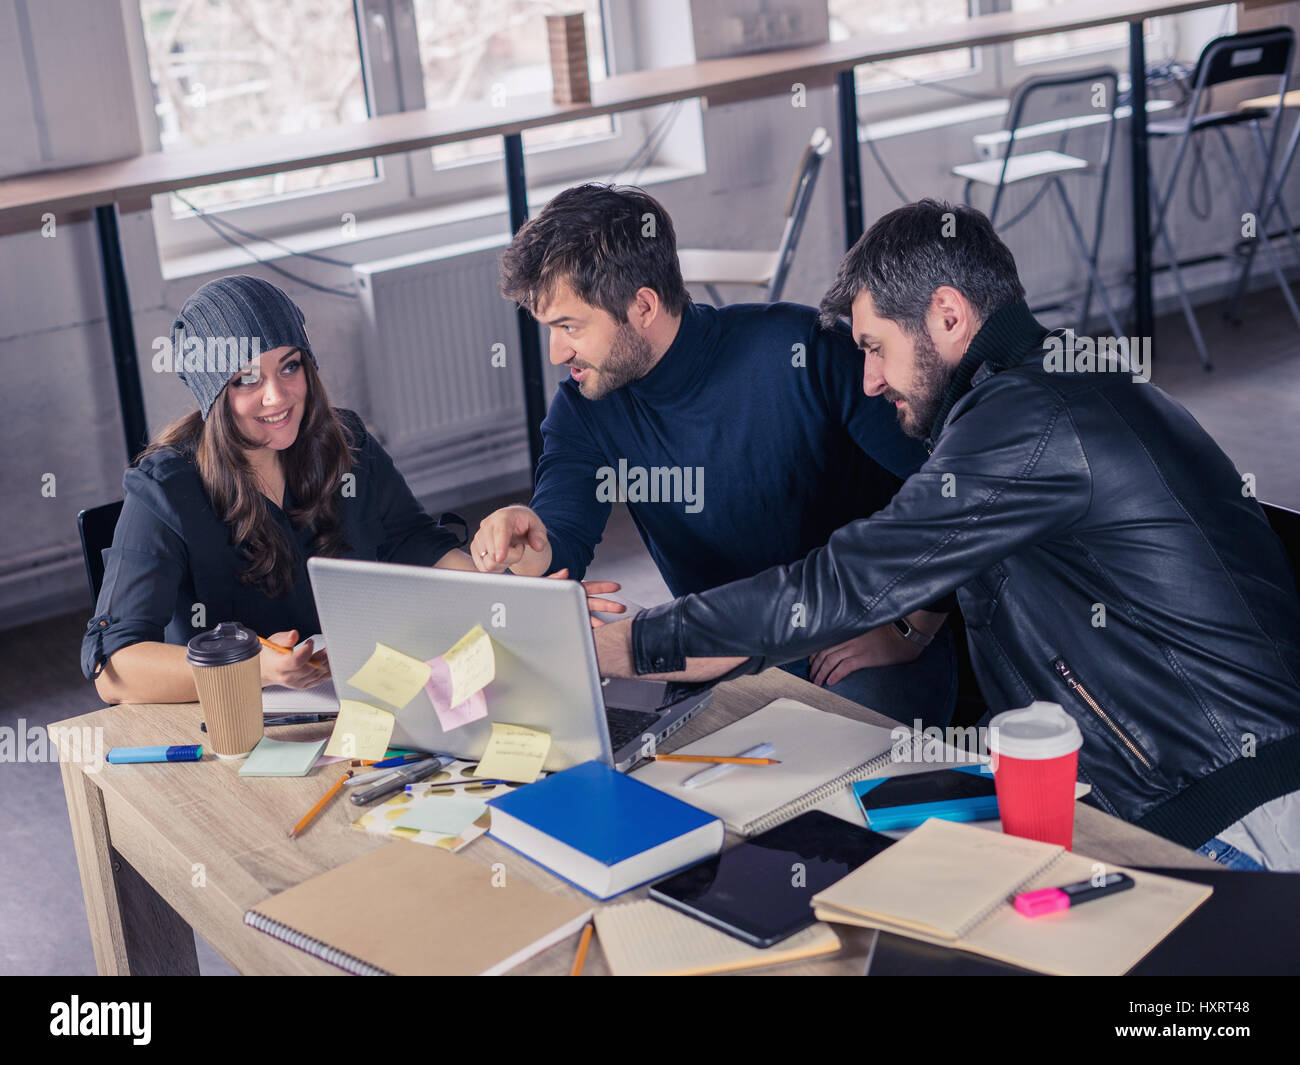 Young smart team. Group of  modern people discussing project on meeting in the office. Working environment with laptop, coffee, notepads and stationer Stock Photo